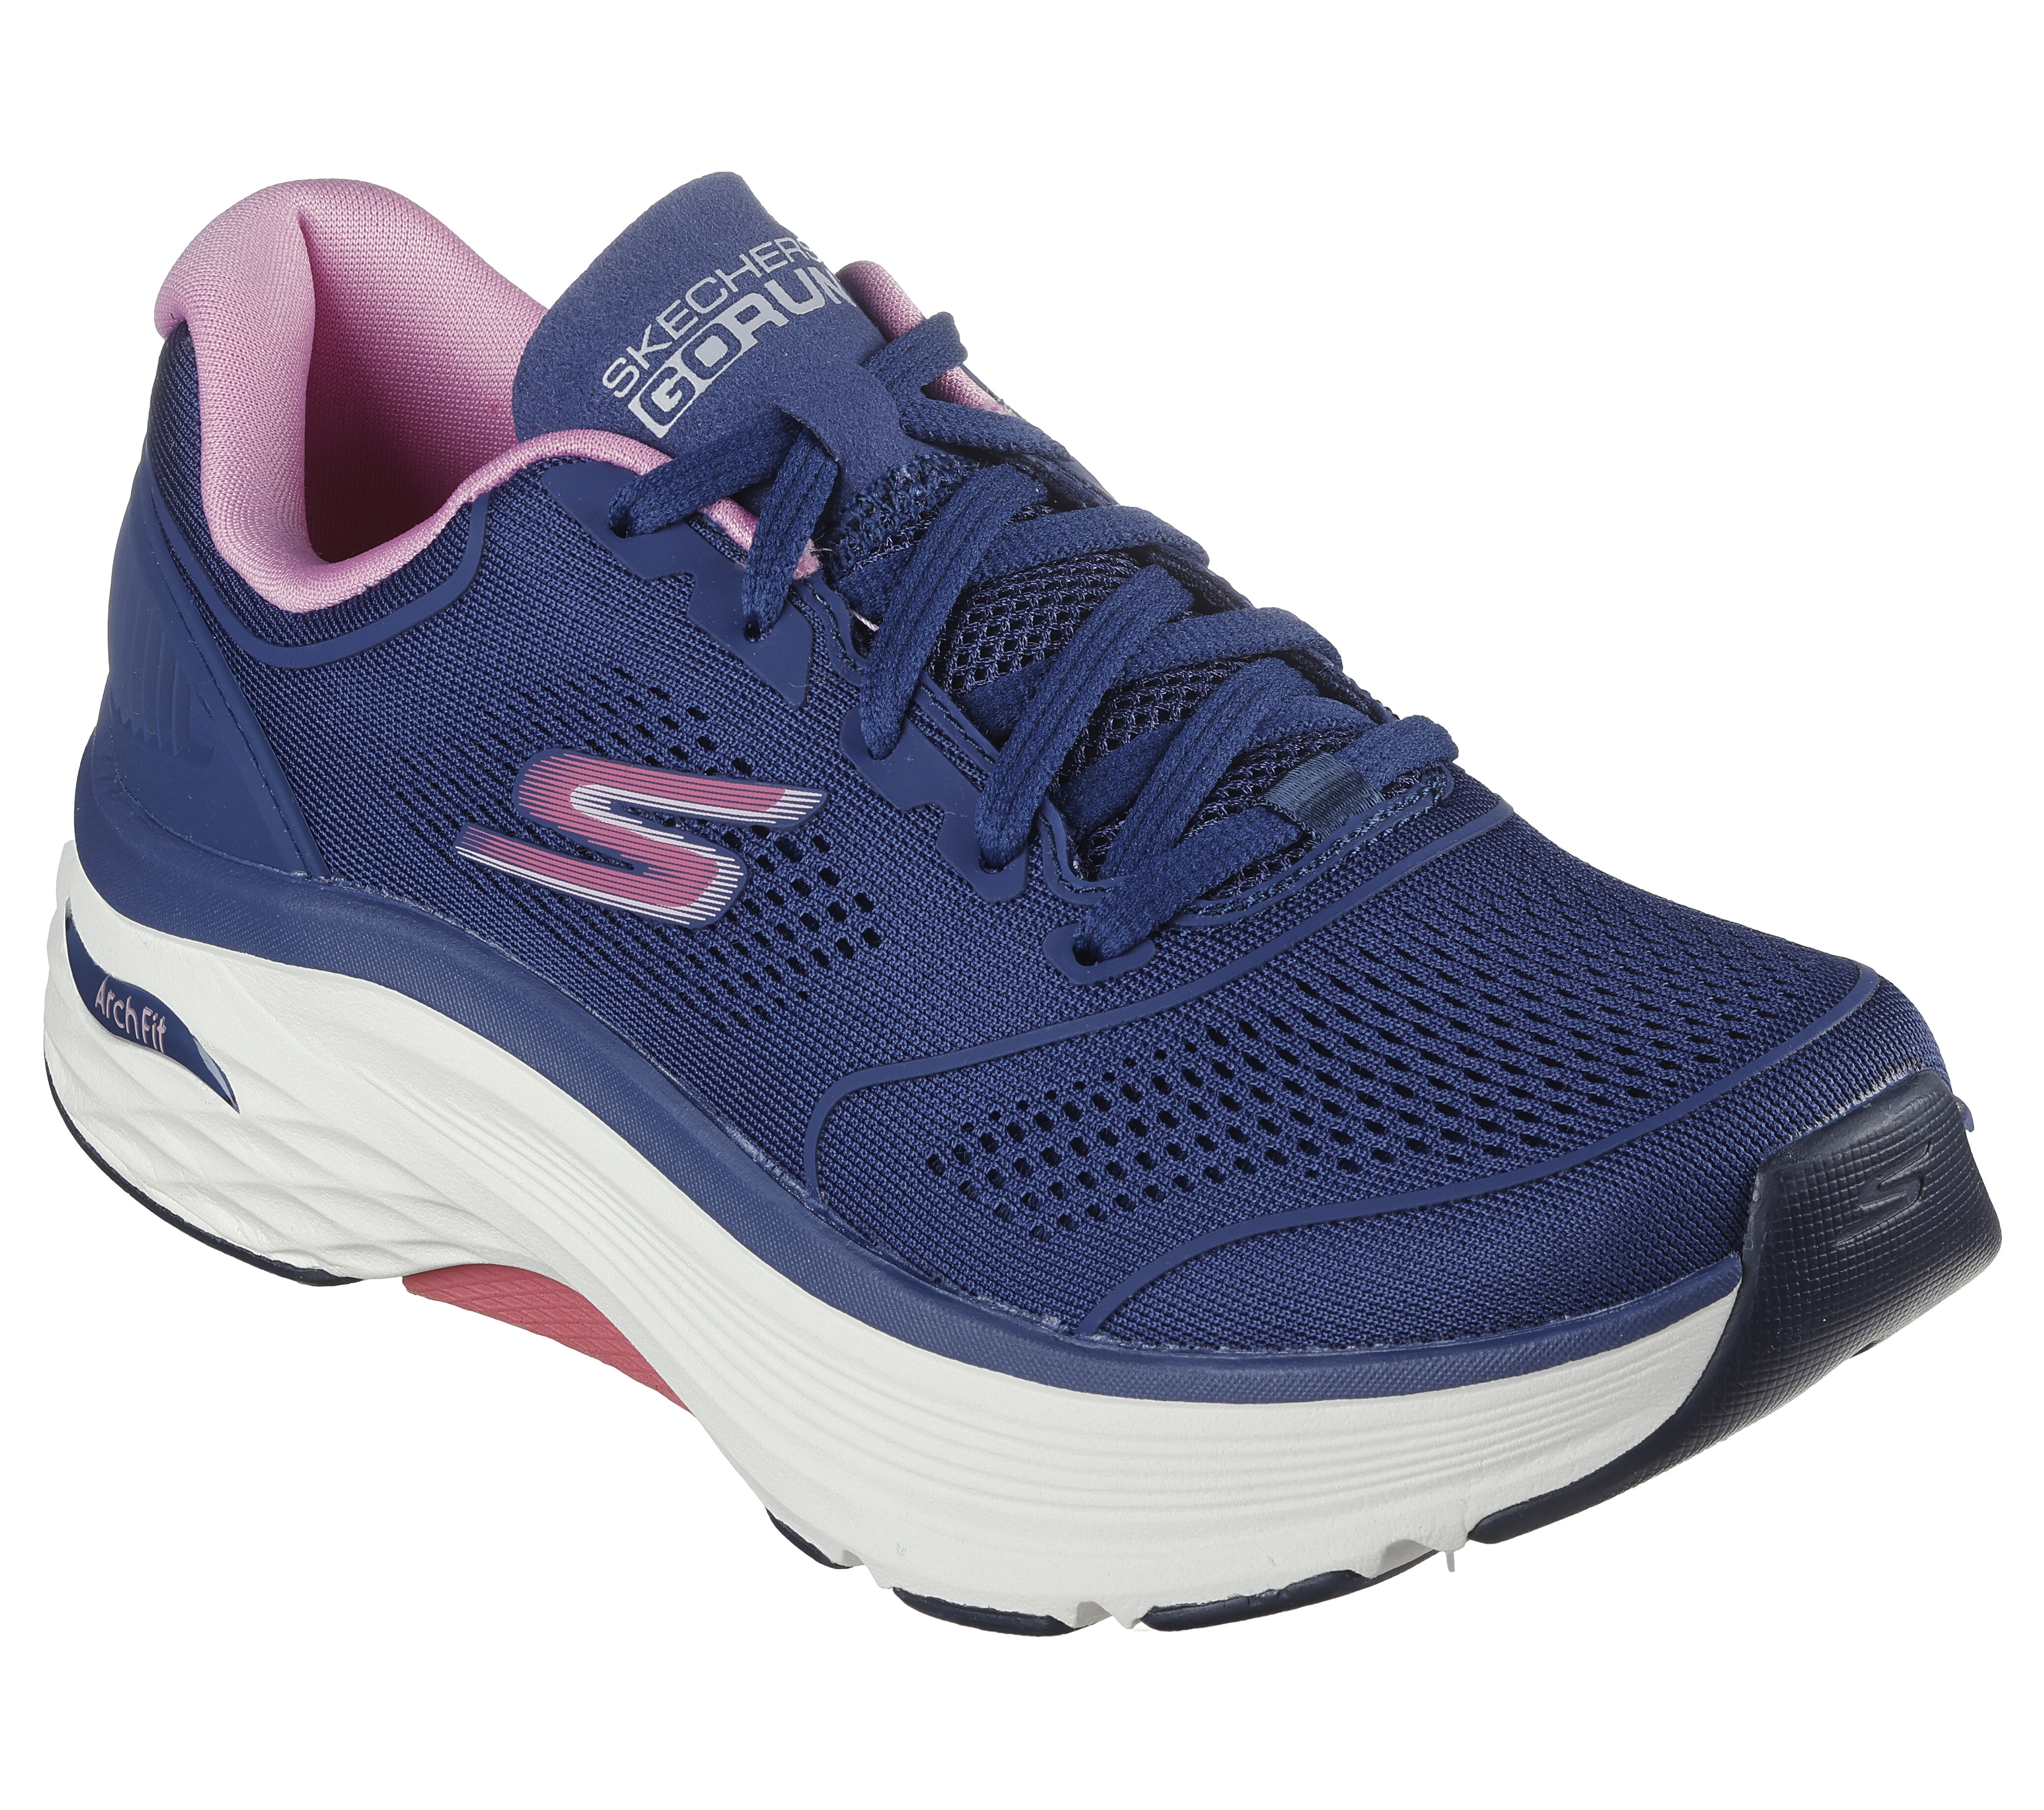 Max Cushioning Arch Fit - Velocity